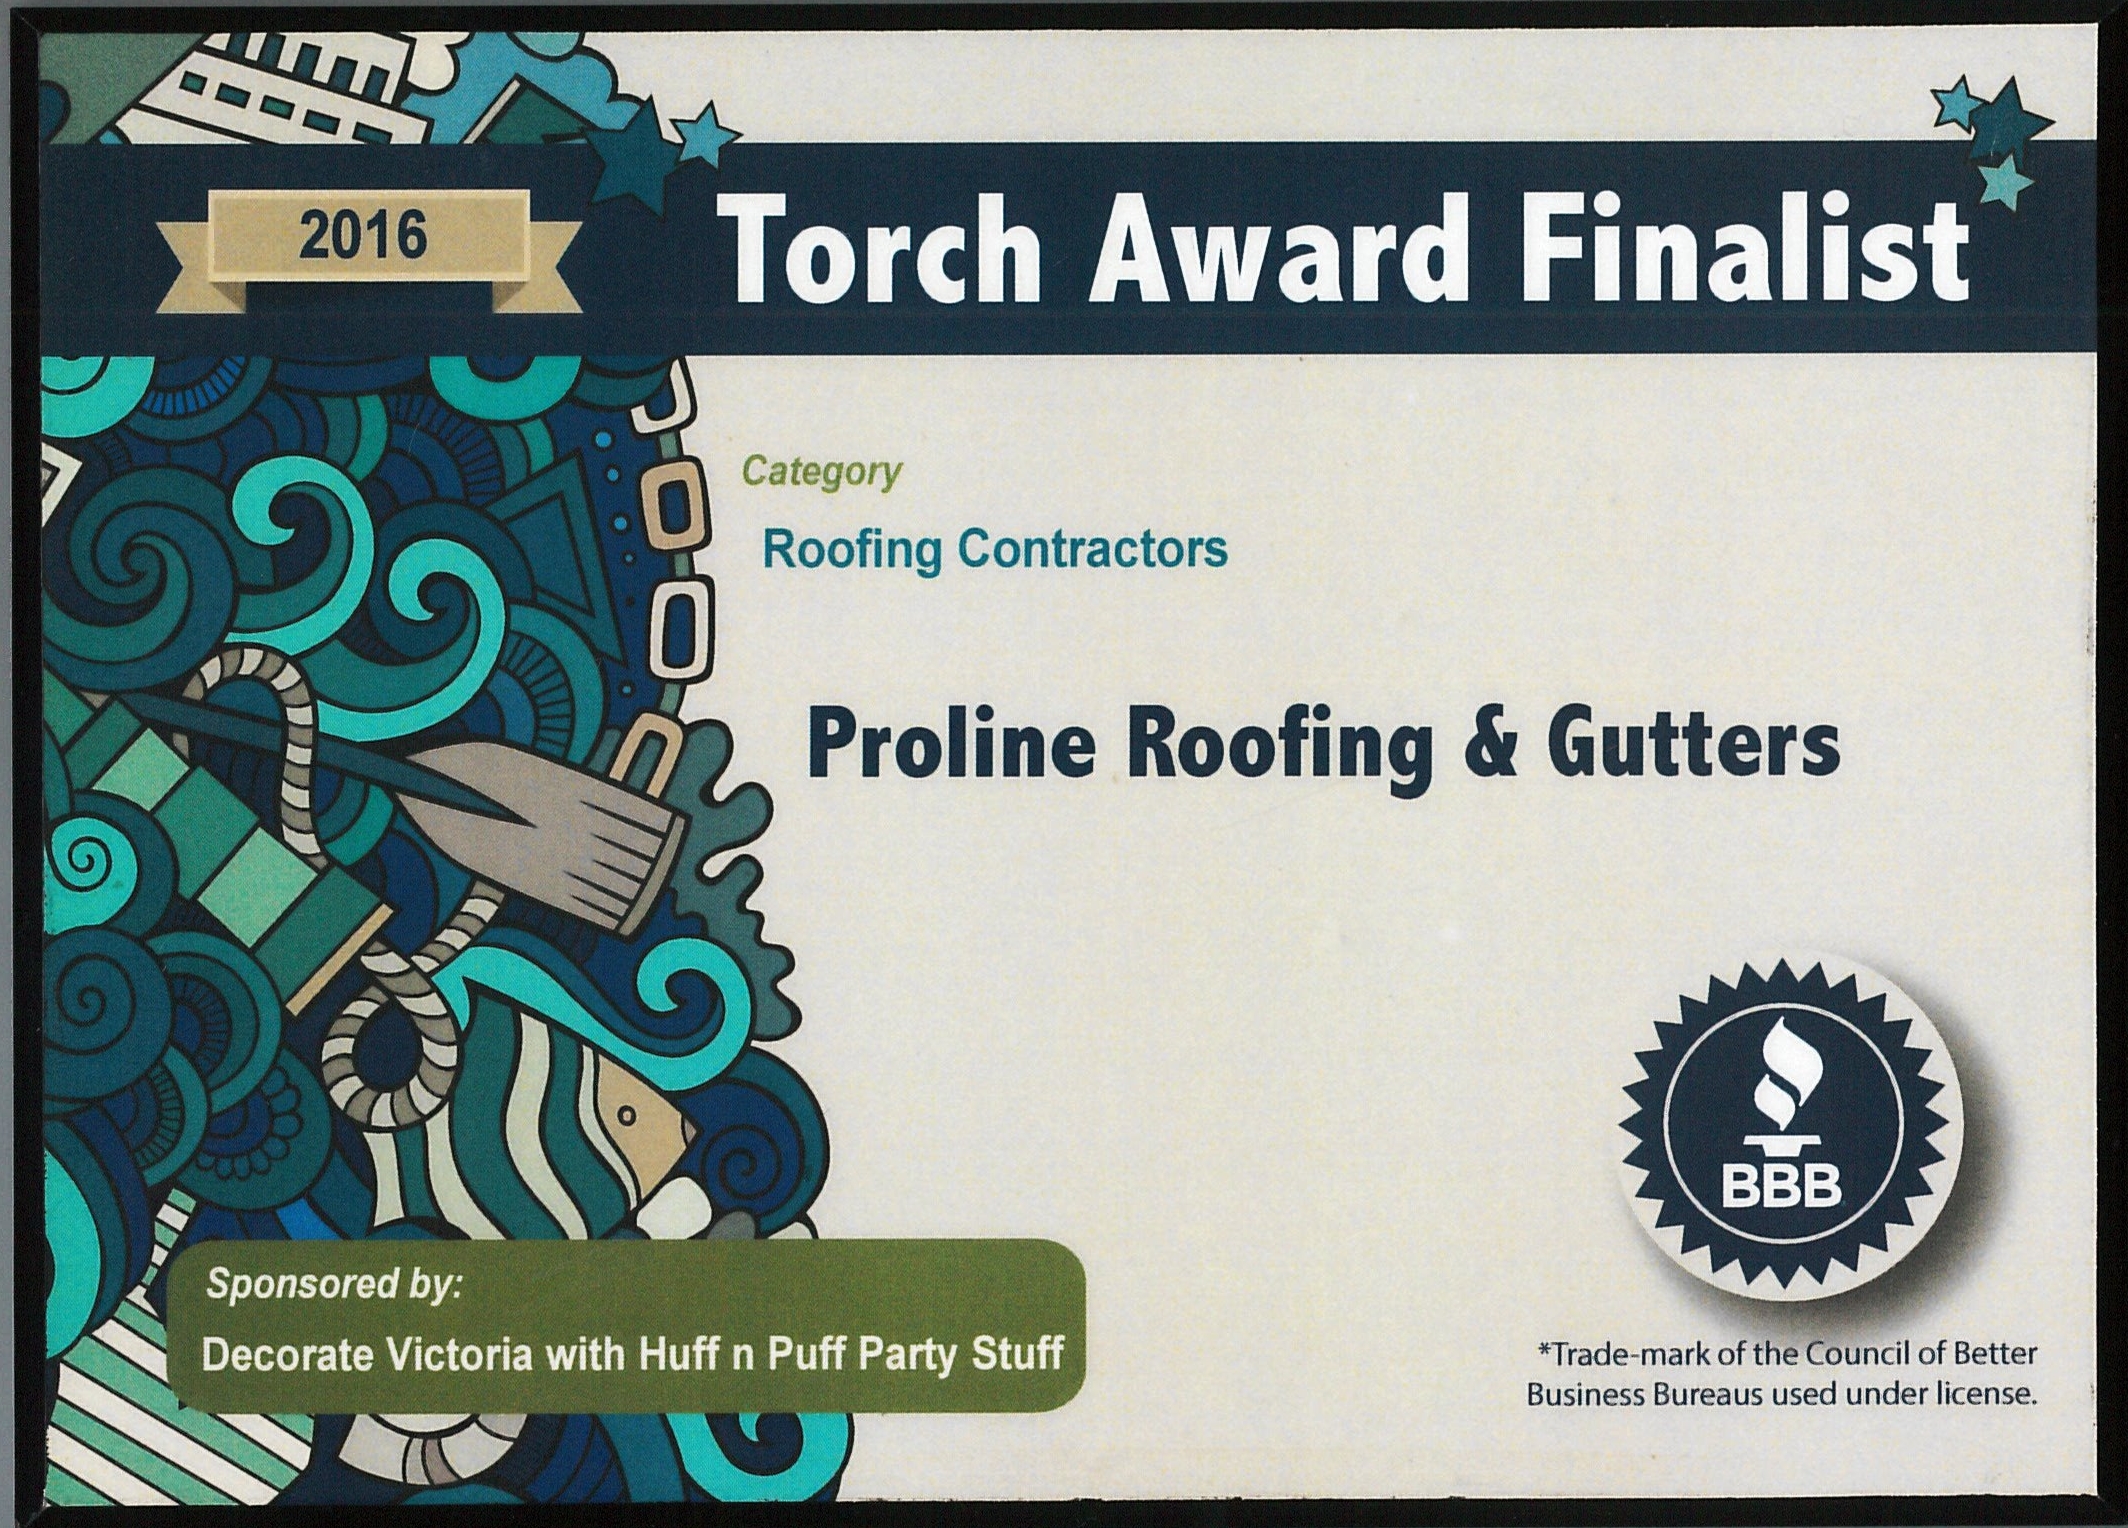 torch award 2016 finalist BBB proline roofing company accredited Victoria bc